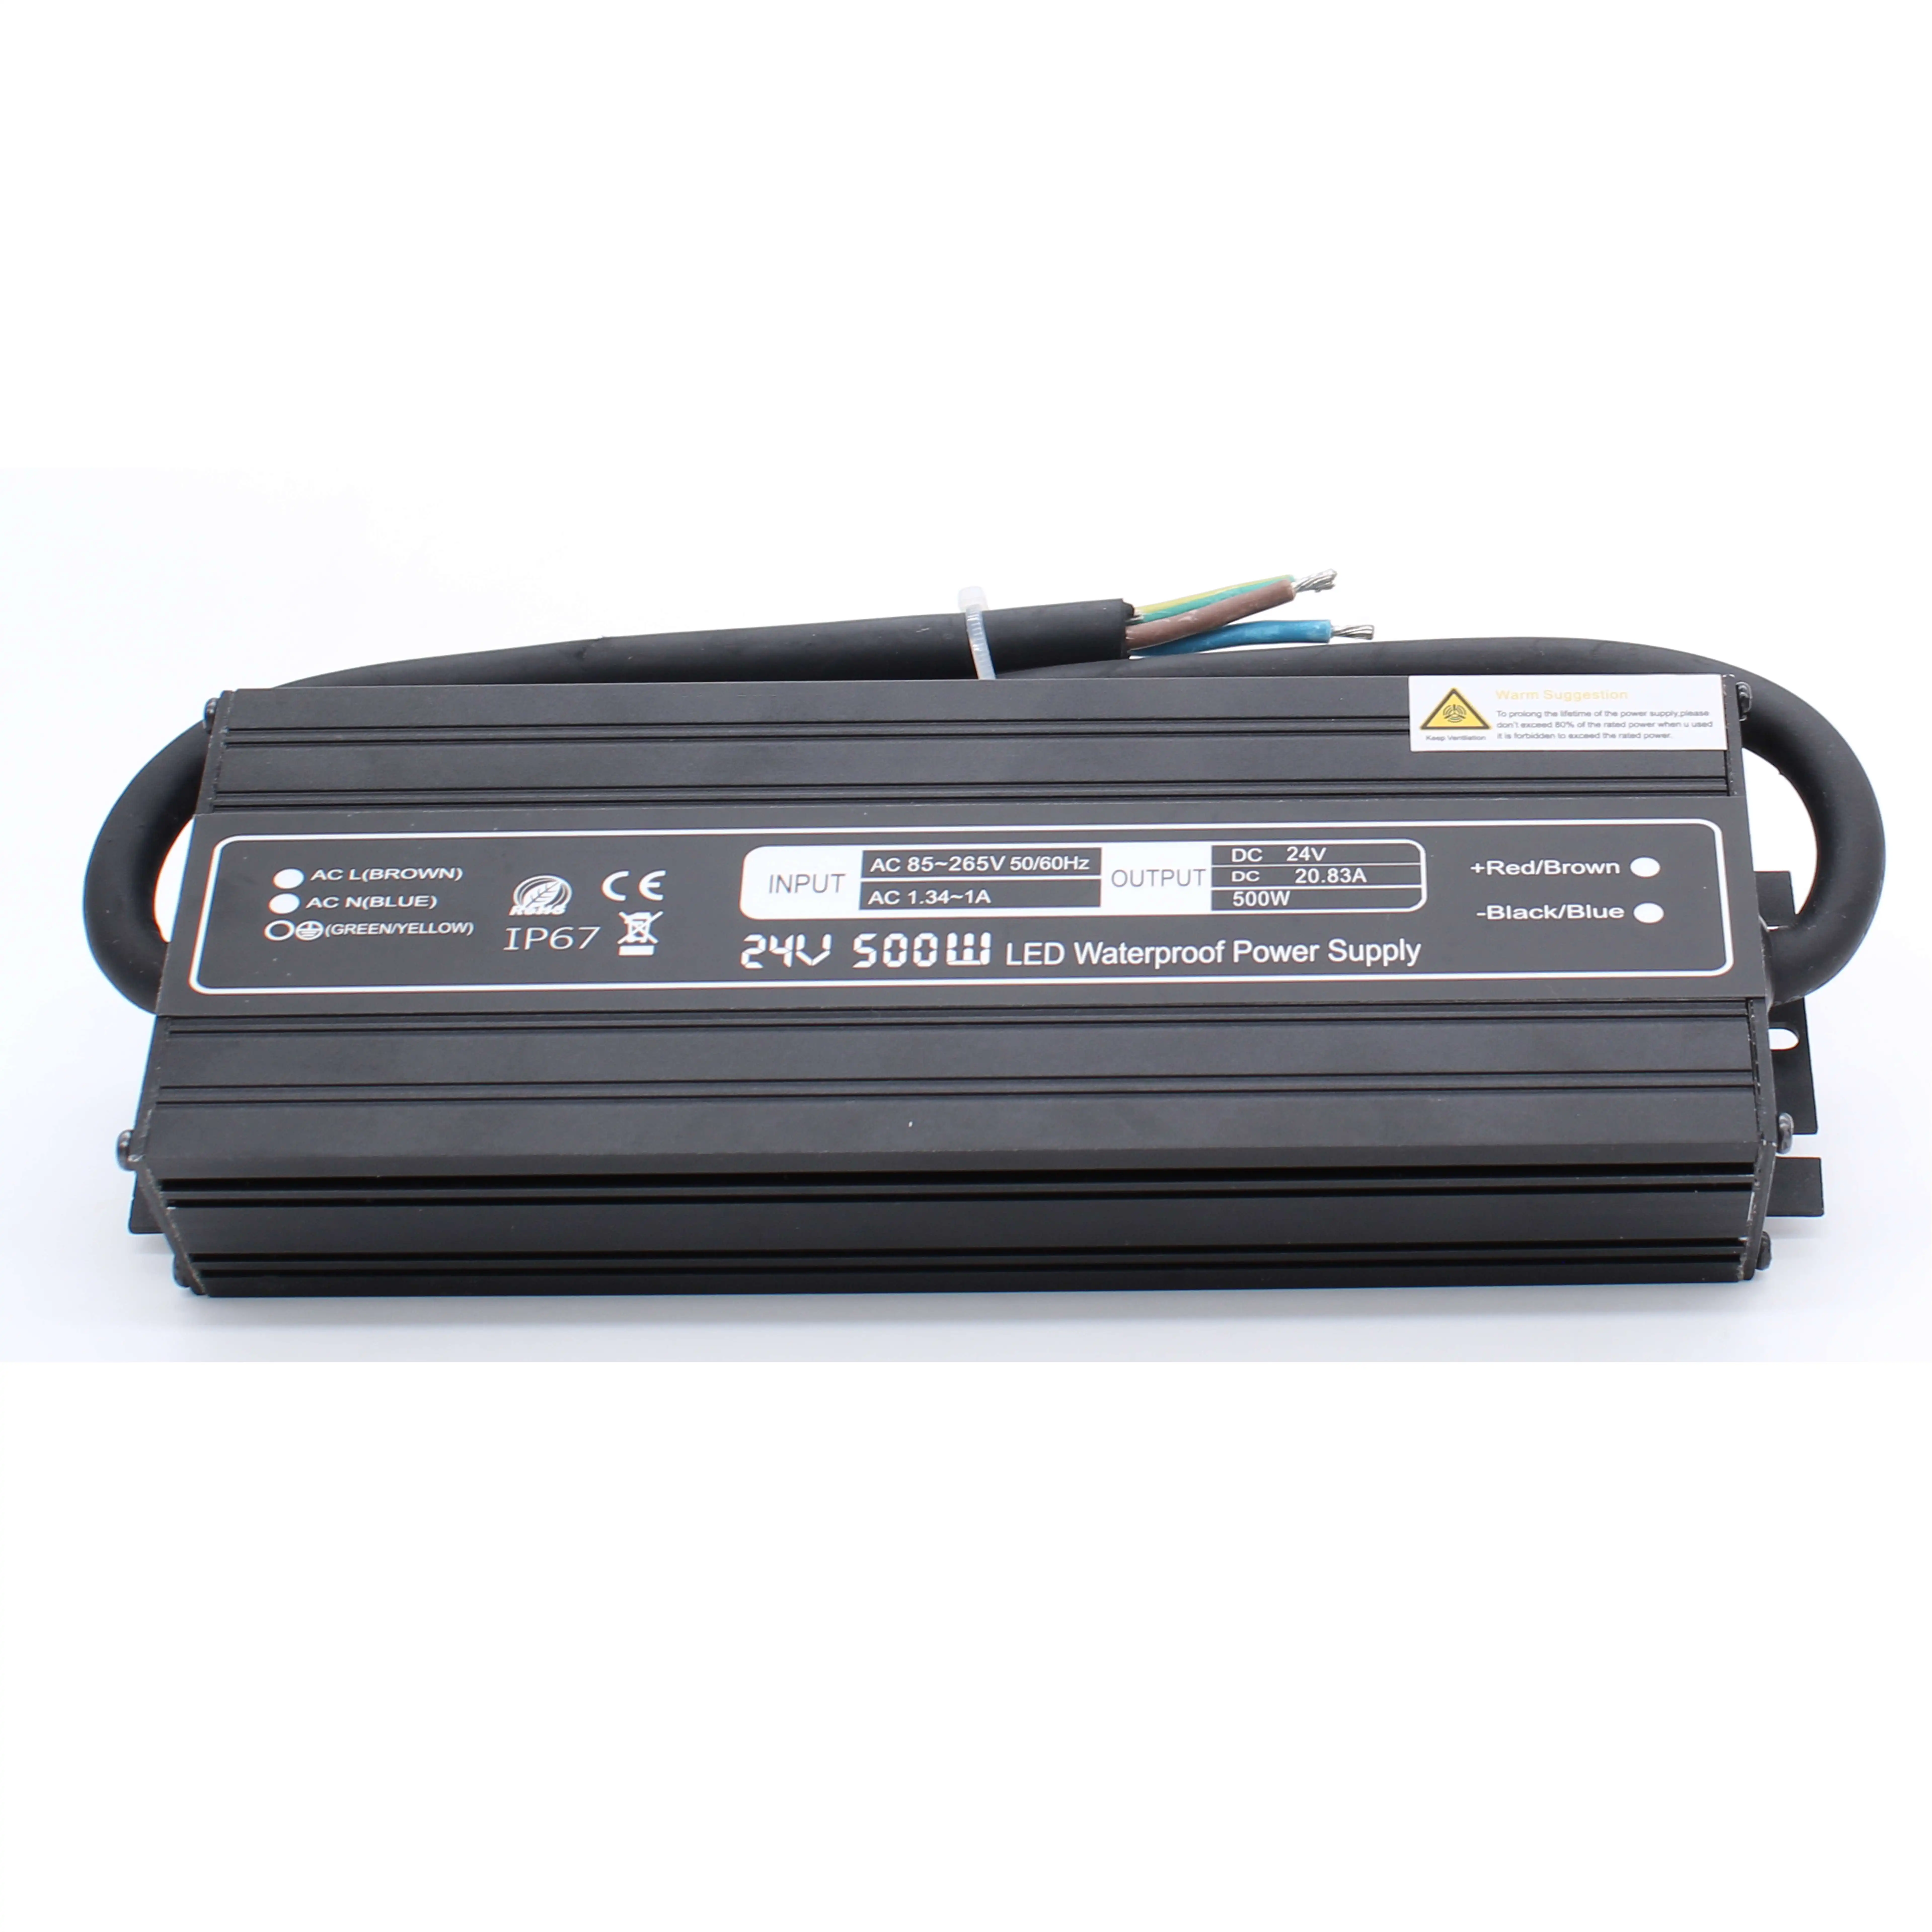 24v dc input Power Supply Constant Voltage type LED Driver 500W for Light strip